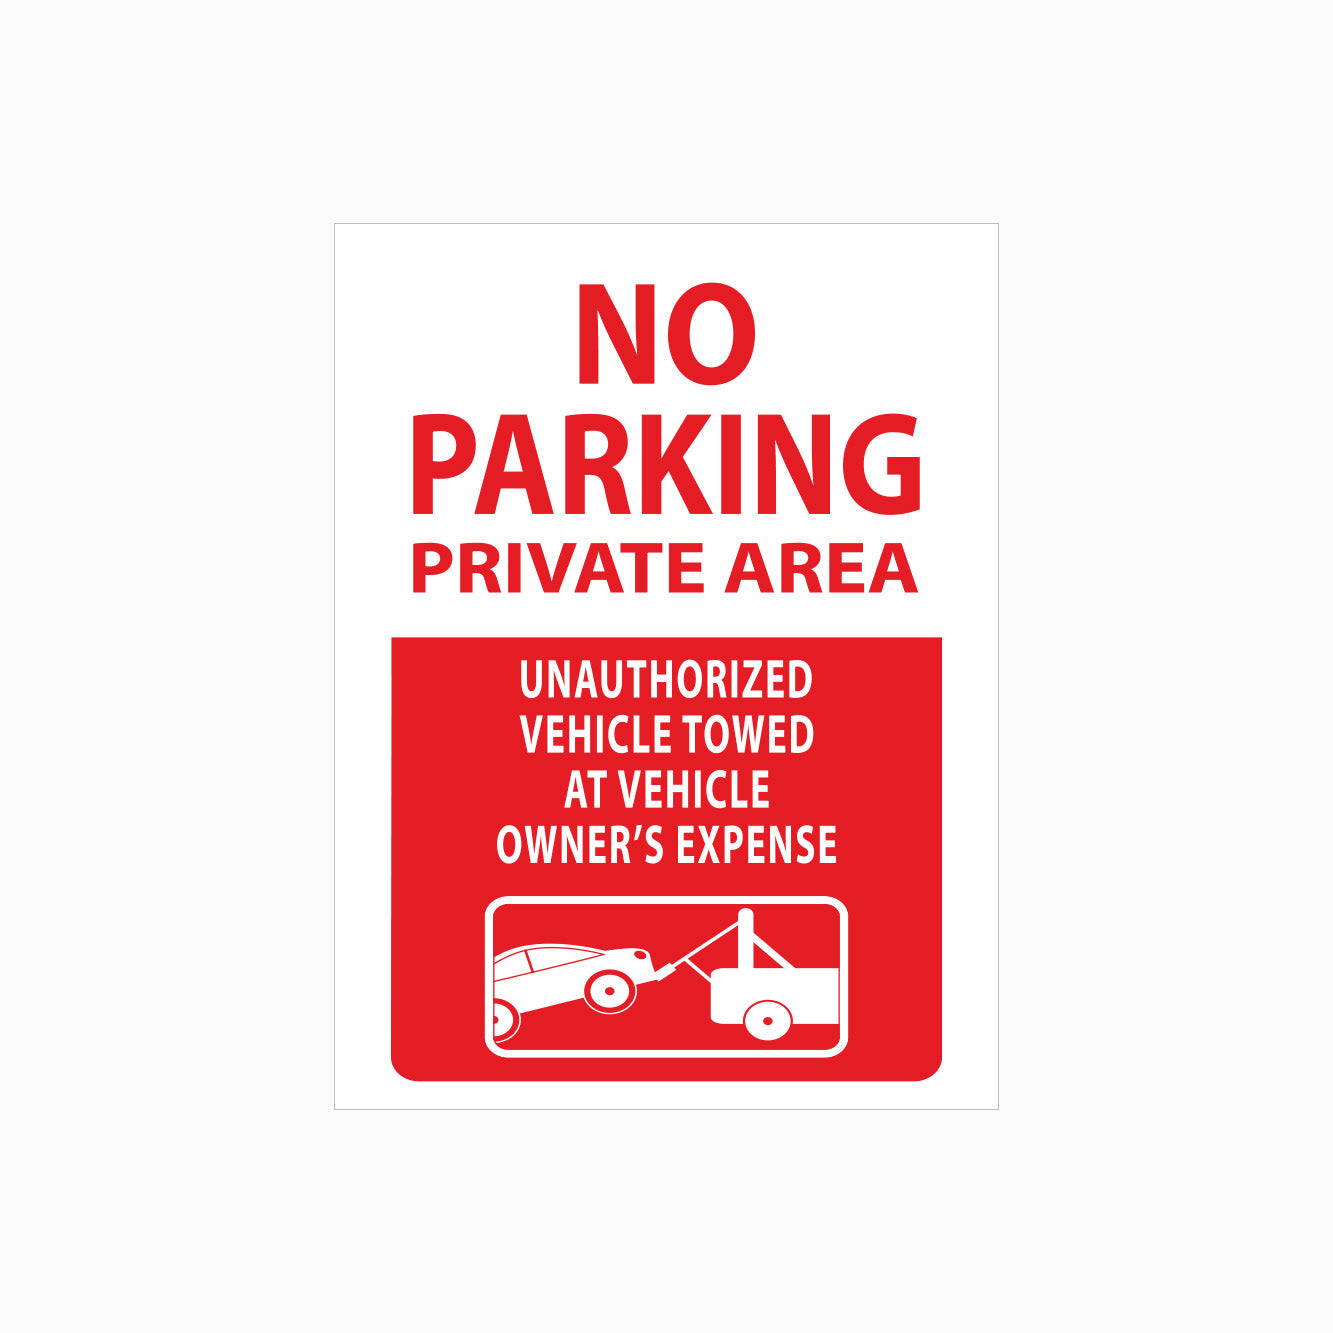 NO PARKING PRIVATE AREA SIGN - PARKING AND NO PARKING SIGNS FROM GET SIGNS